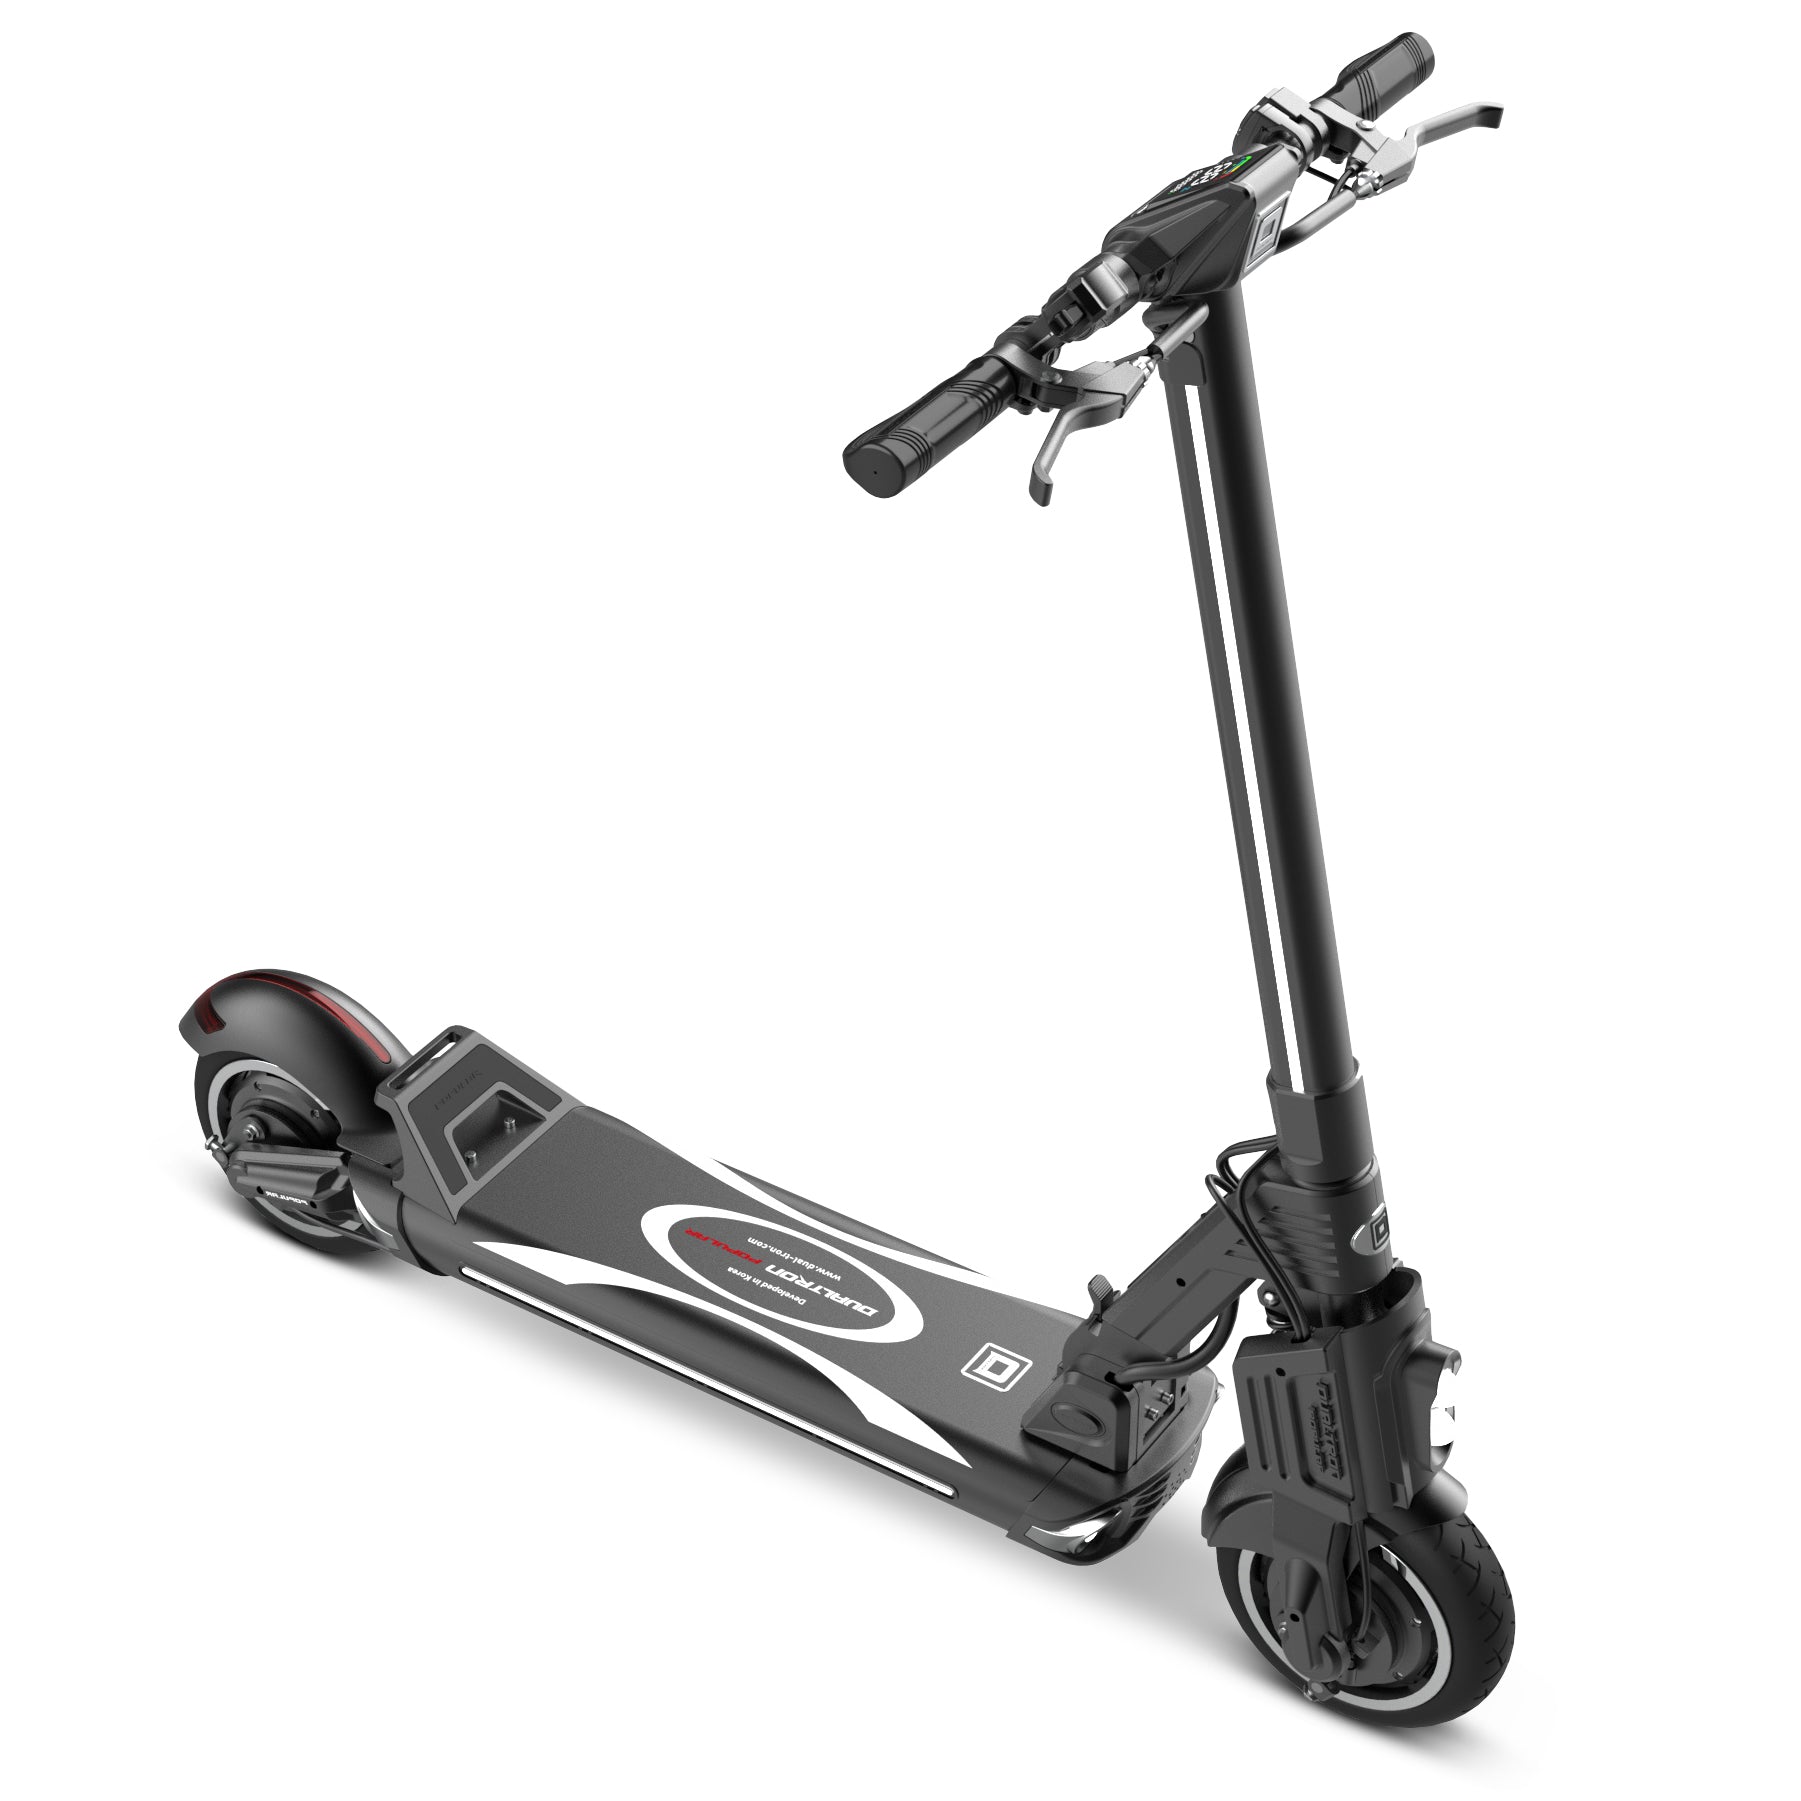 Dualtron X Limited Electric Scooter - Minimotors USA